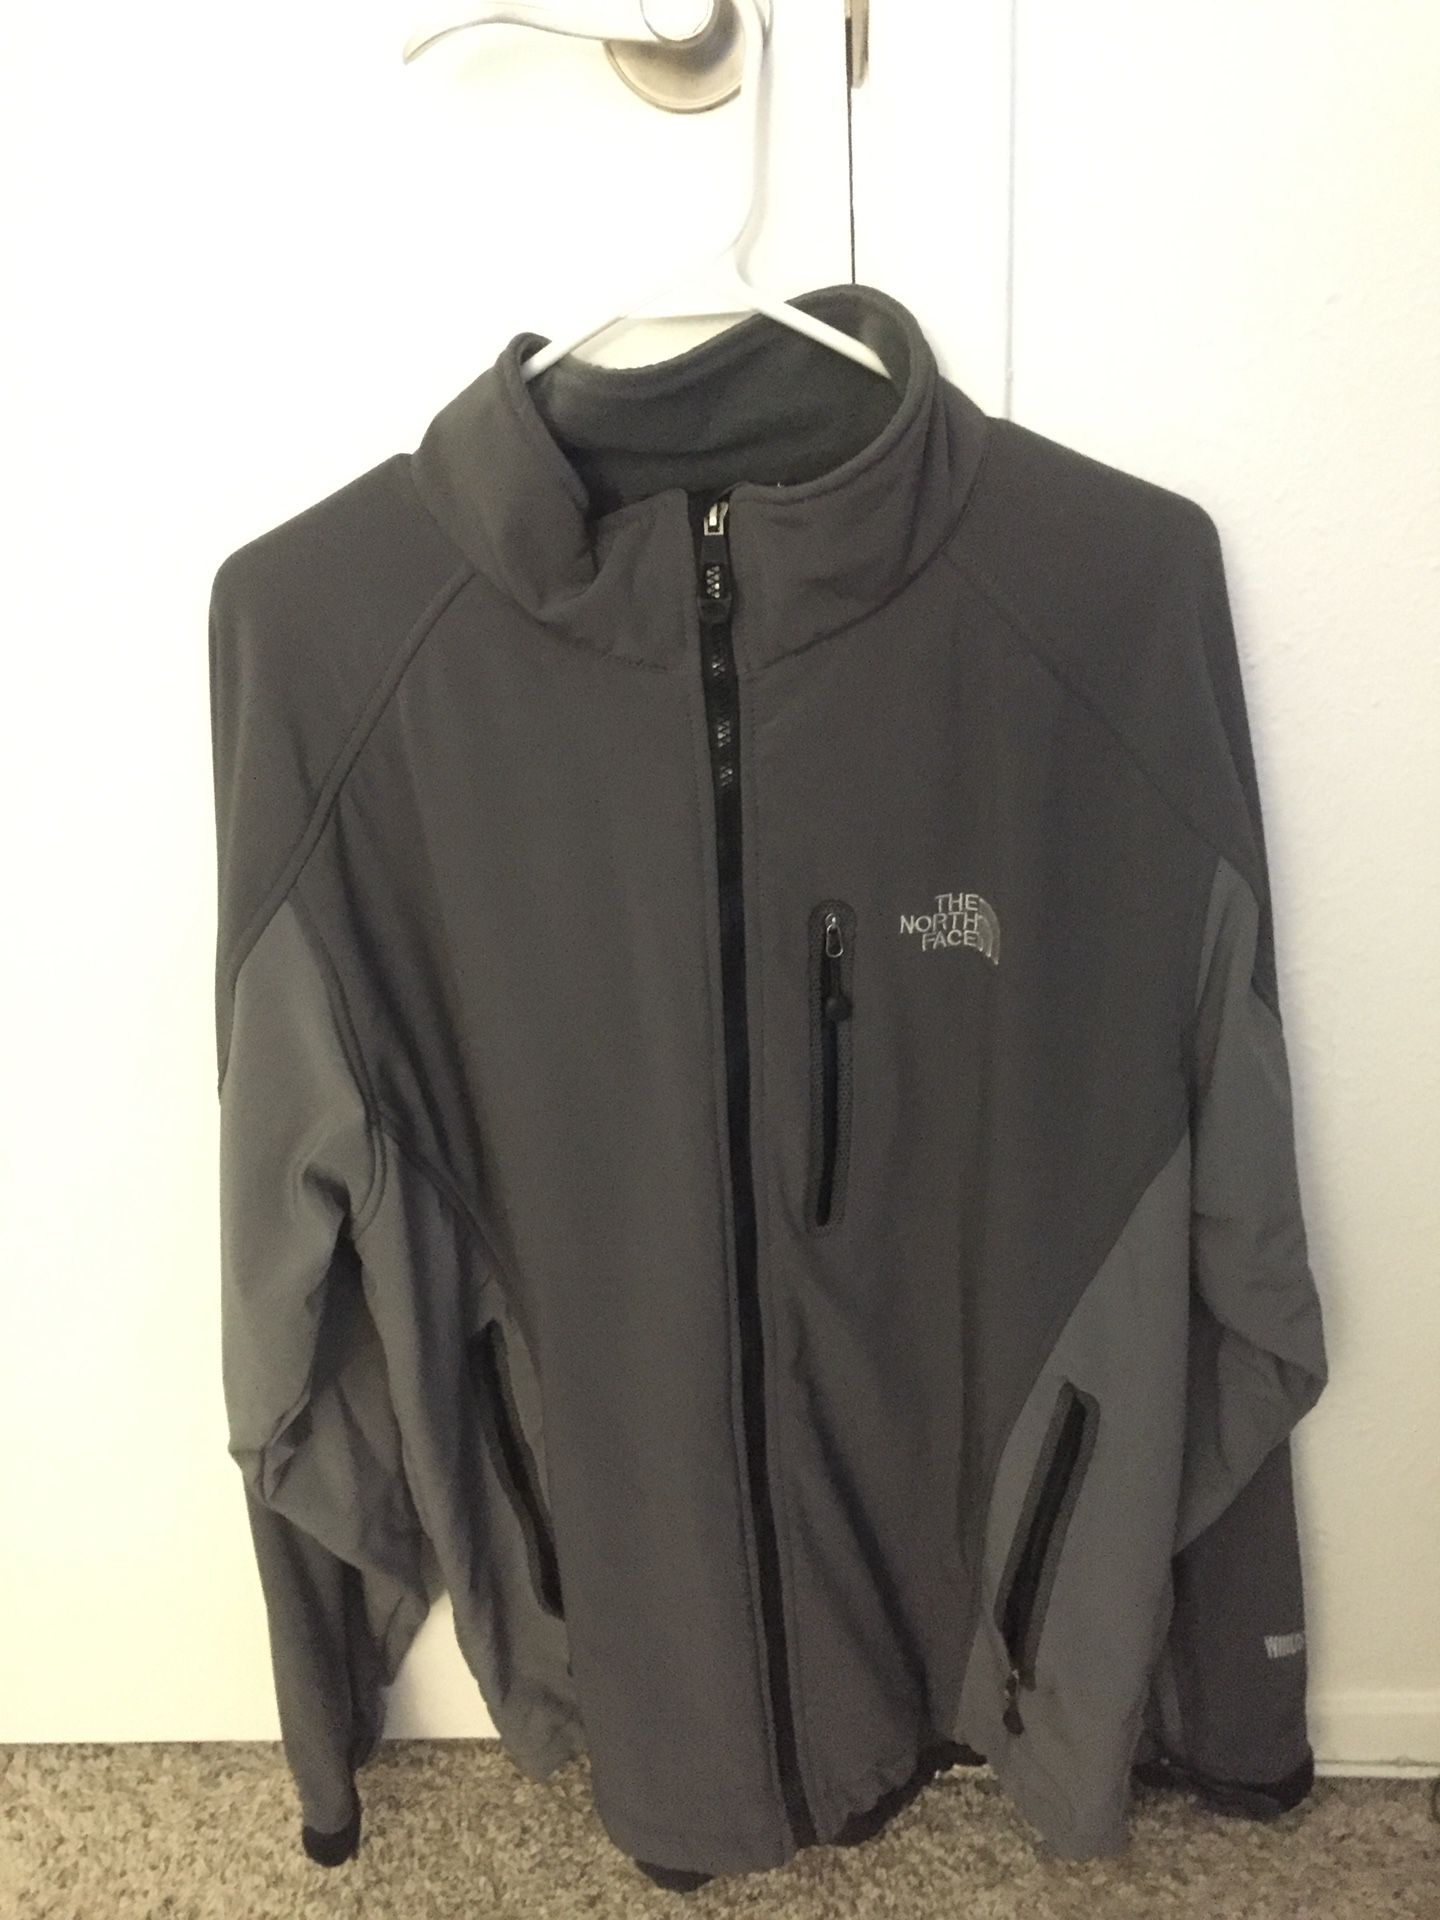 Large - The North Face Wind stopper Jacket